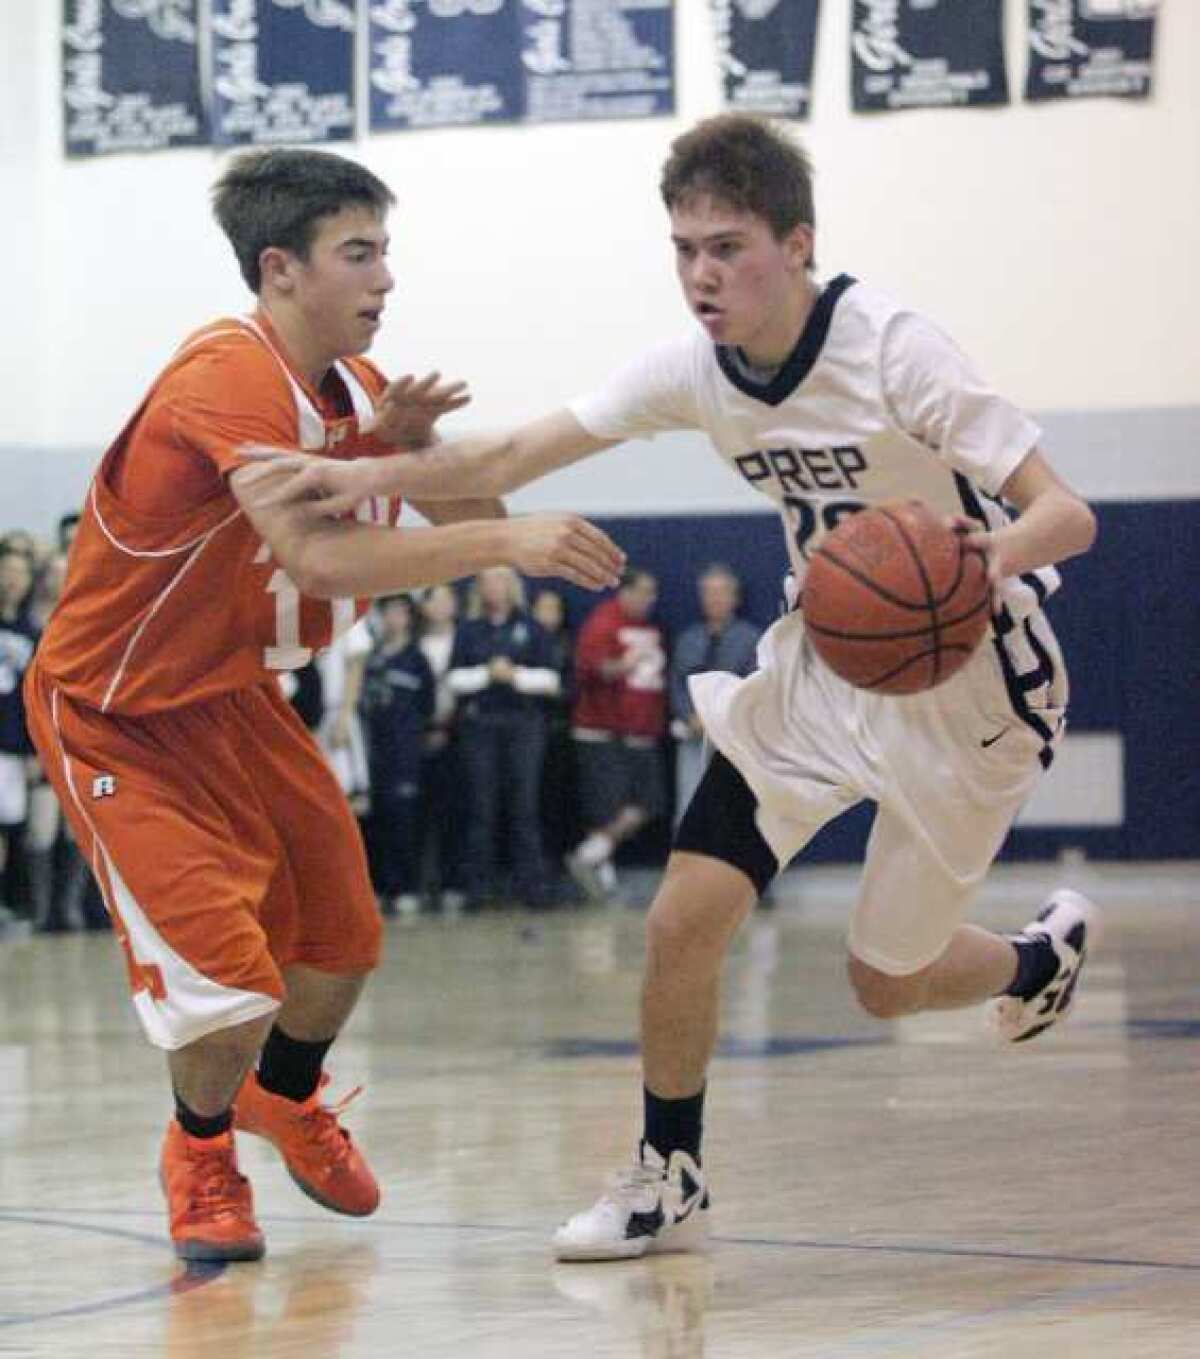 ARCHIVE PHOTO: Flintridge Prep's Robert Cartwright is leading the Rebels, averaging 23 points a game these playoffs.